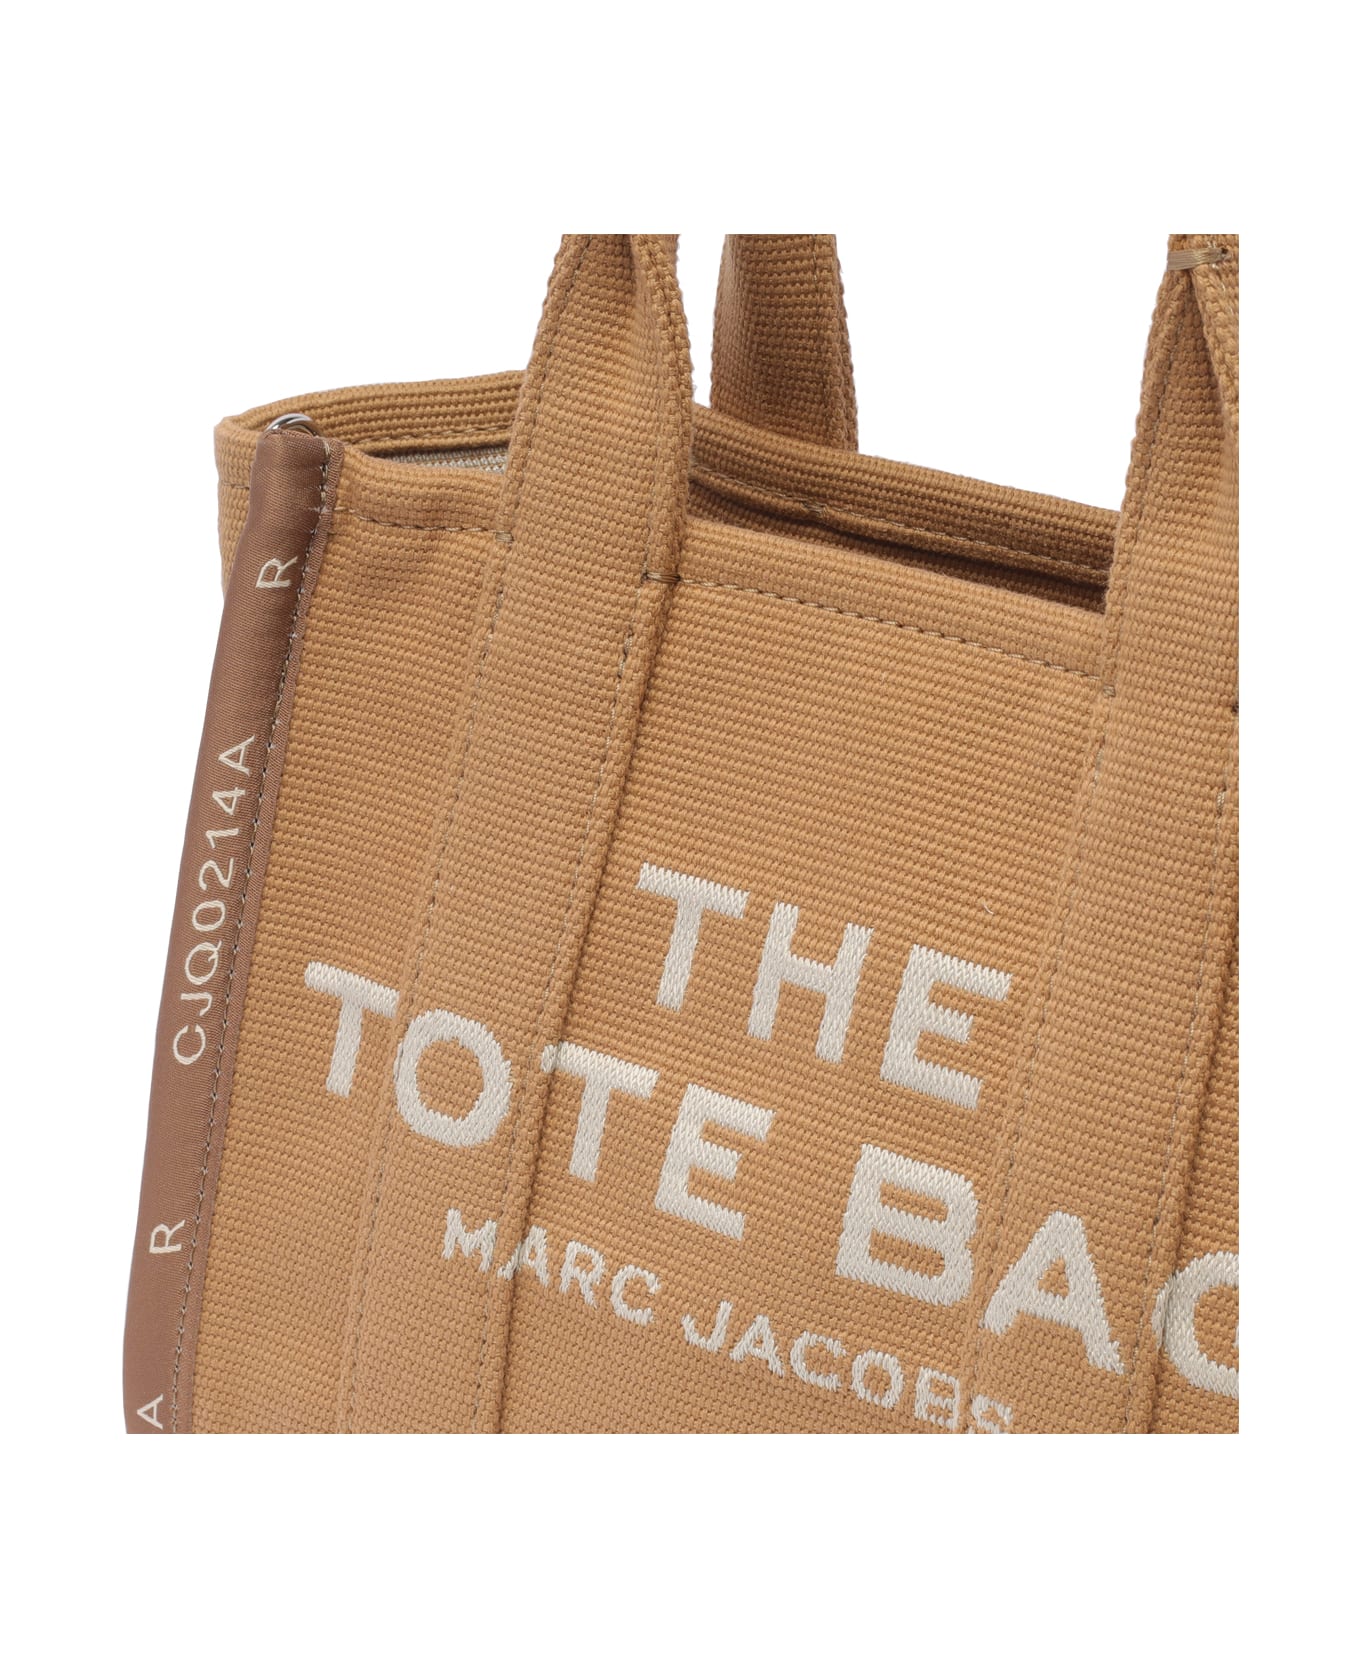 Marc Jacobs The Mini Tote Bag - Brown トートバッグ